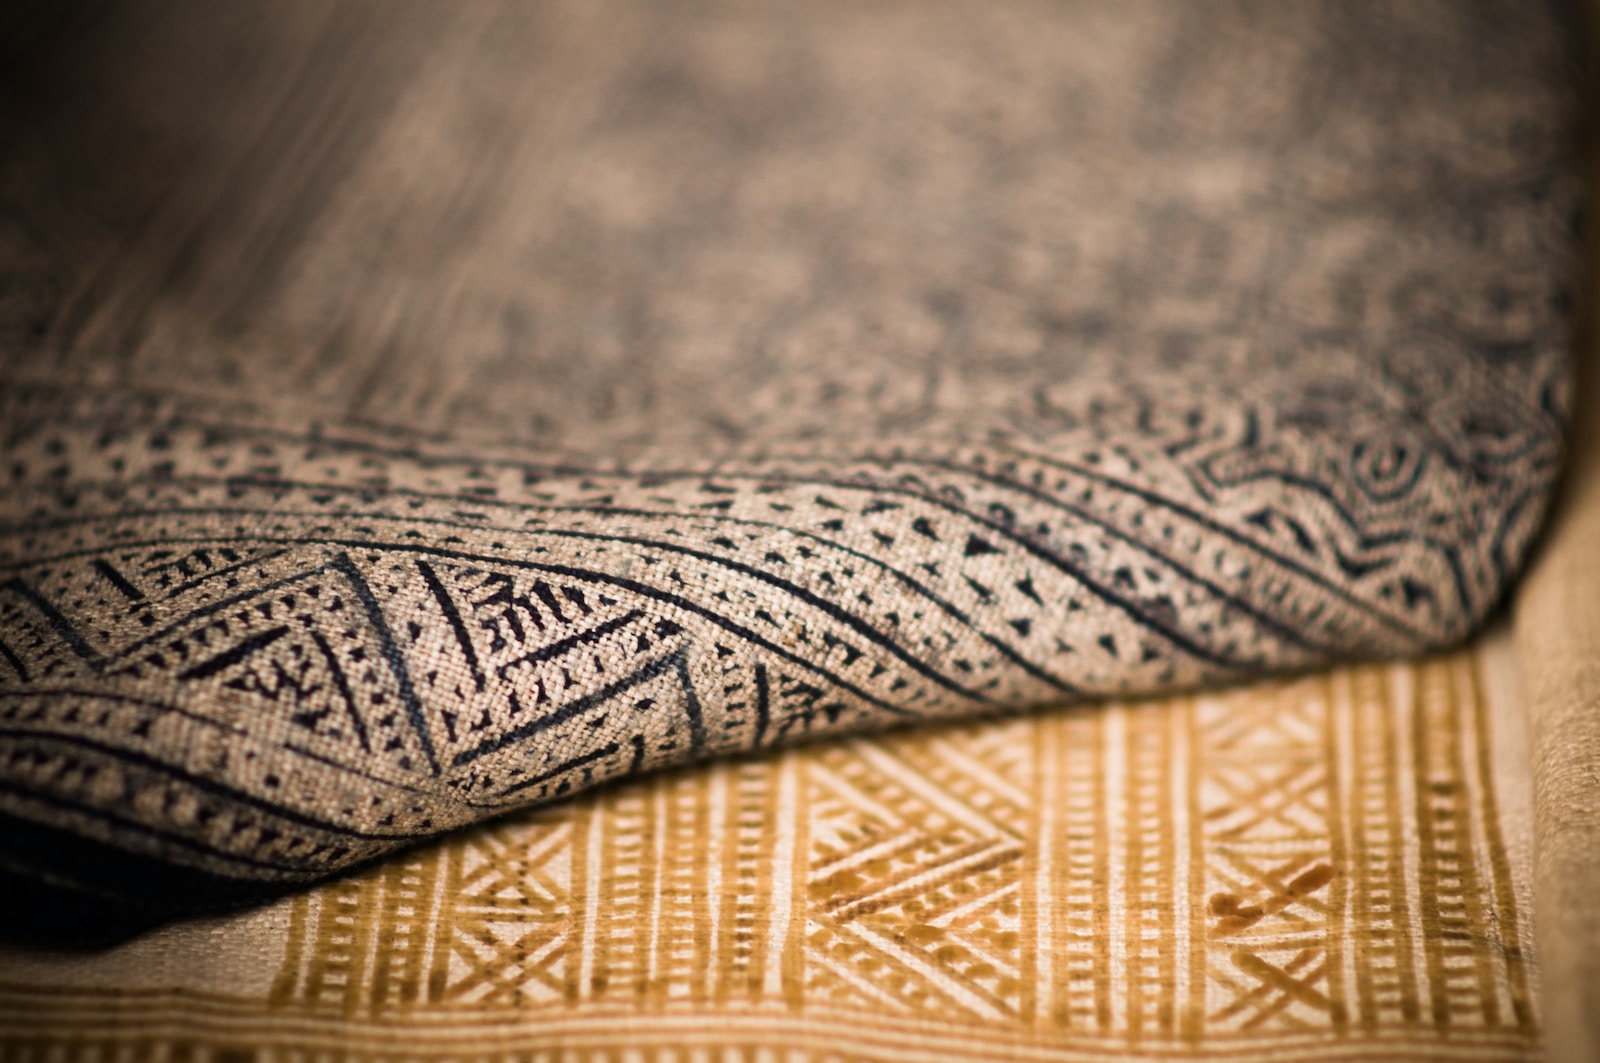 A close up that shows the texture of two different patterned rugs